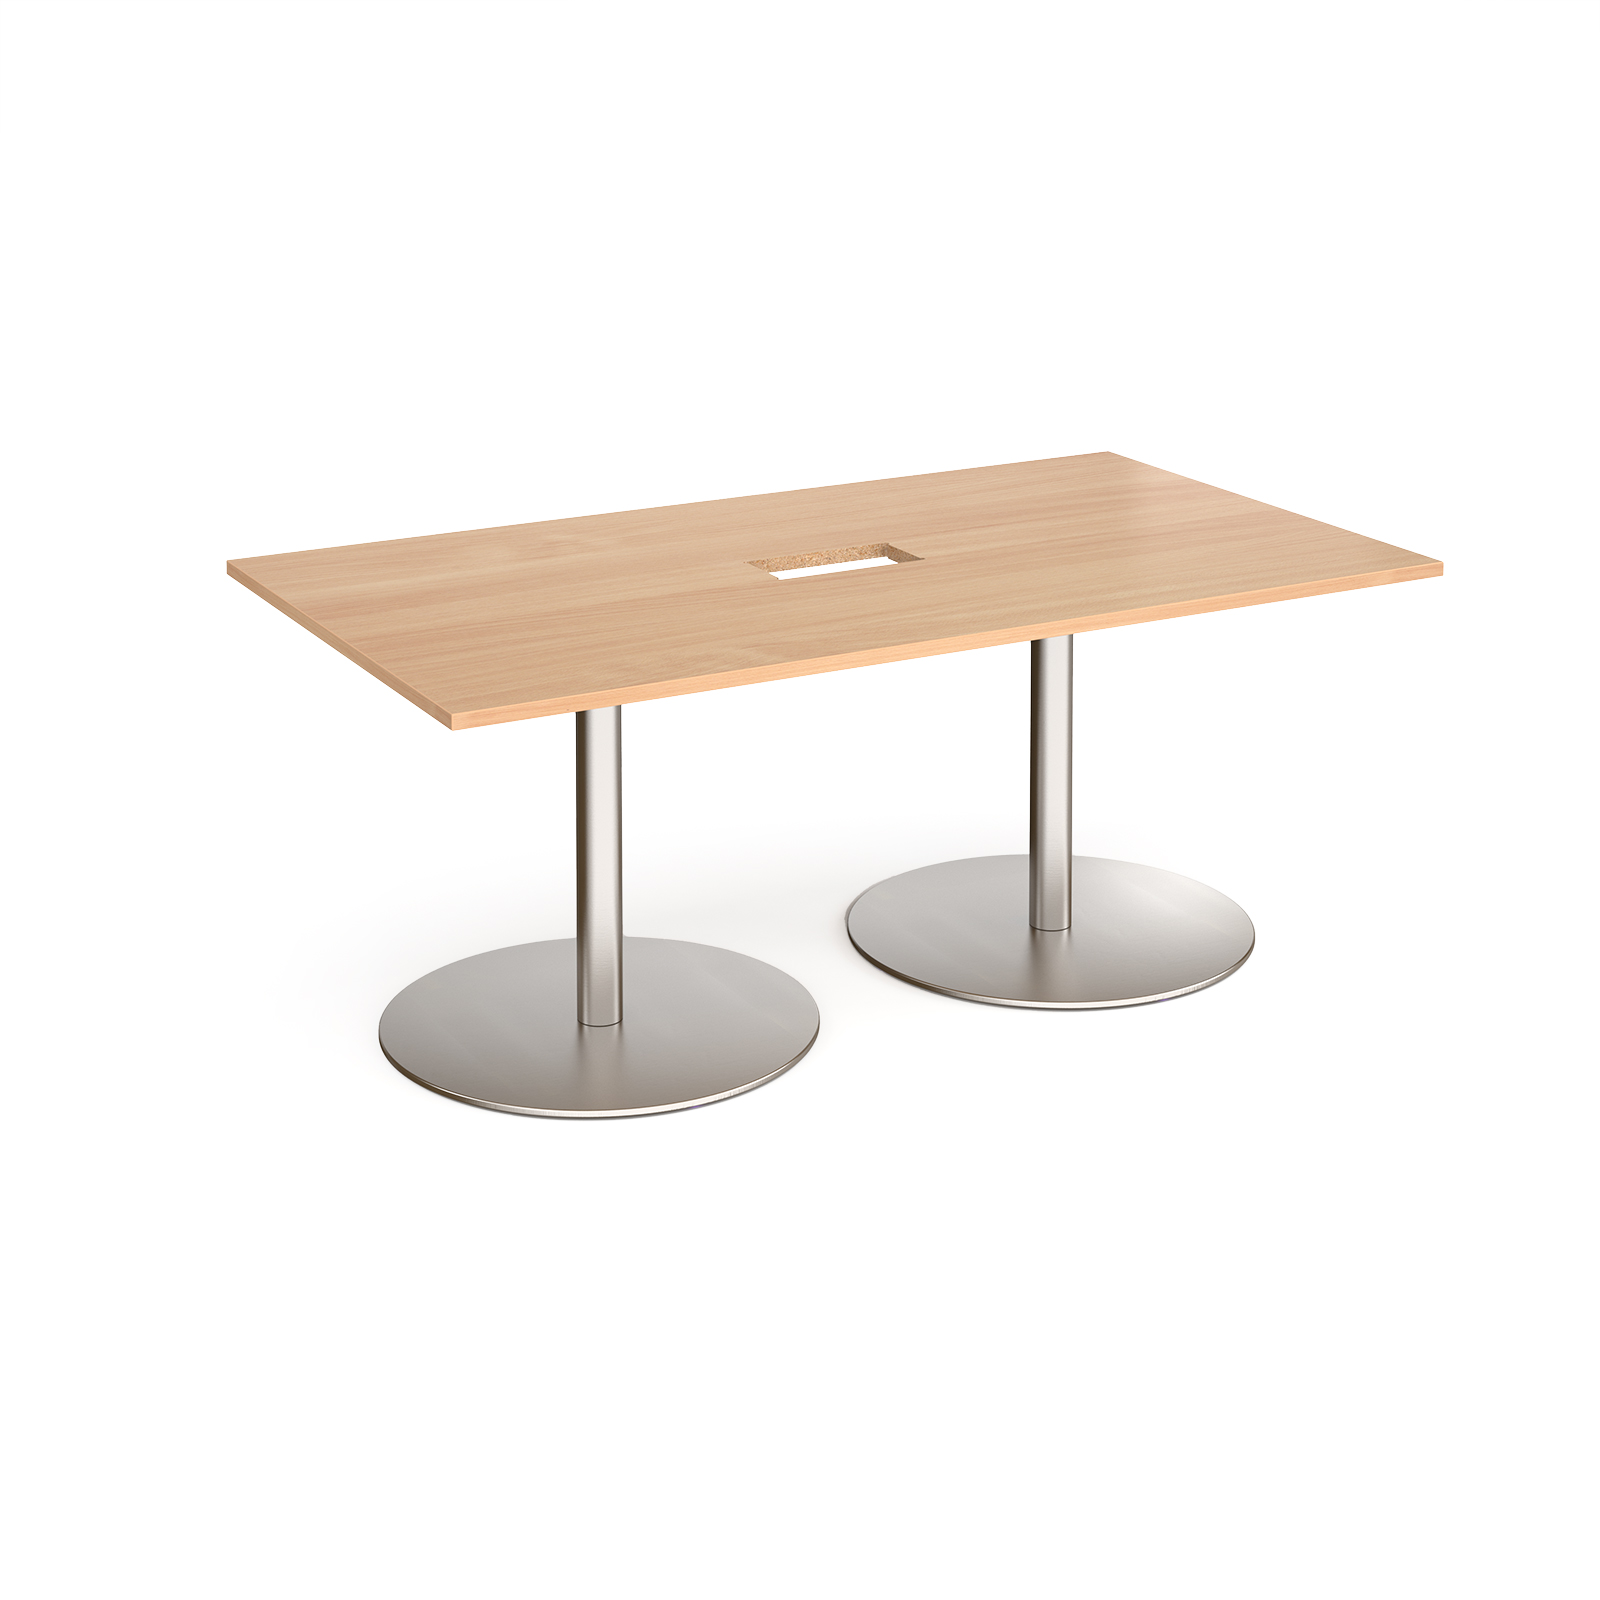 Eternal rectangular boardroom table 1800mm x 1000mm with central cutout 272mm x 132mm - brushed steel base, beech top